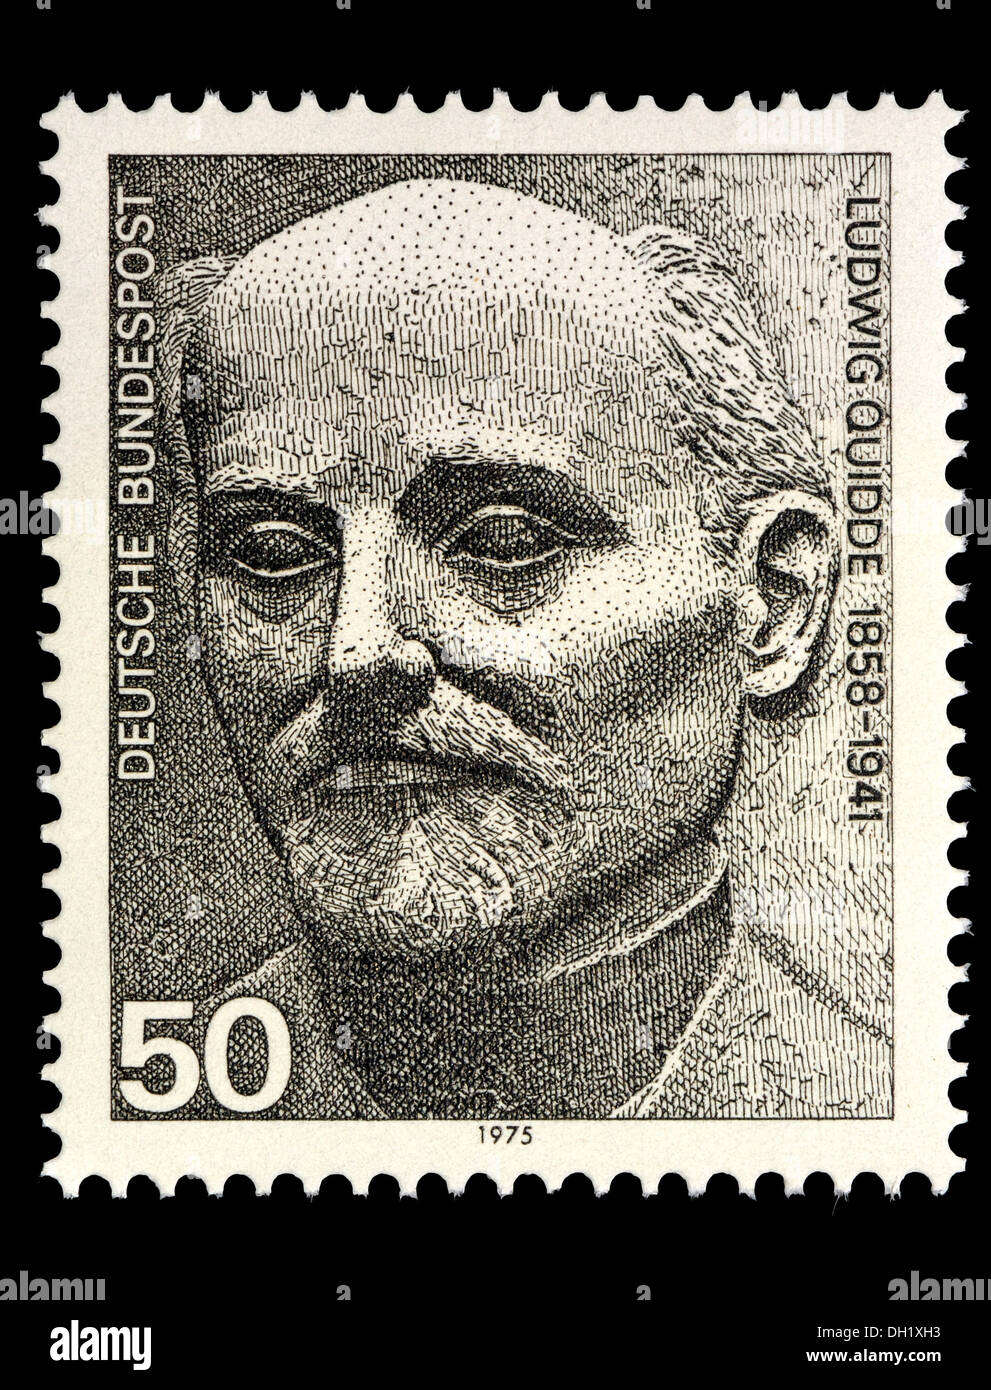 Portrait of Ludwig Quidde (1858–1941: German pacifist and winner of the Nobel peace prize, 1927) on German postage stamp. Stock Photo